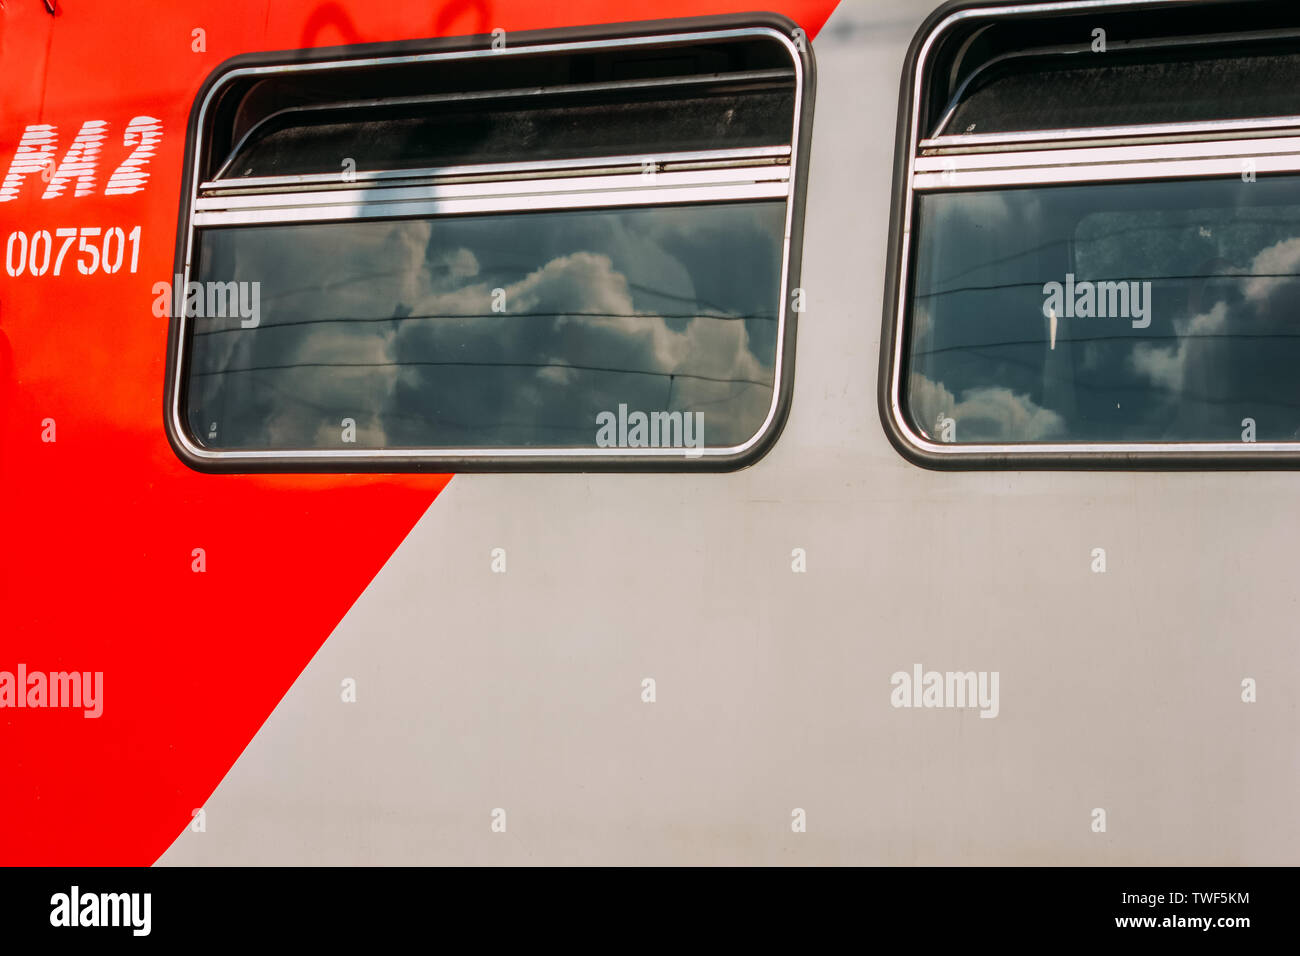 20.06.2019 Bryansk. Russia.Two Windows of the red sleeping car. Stock Photo